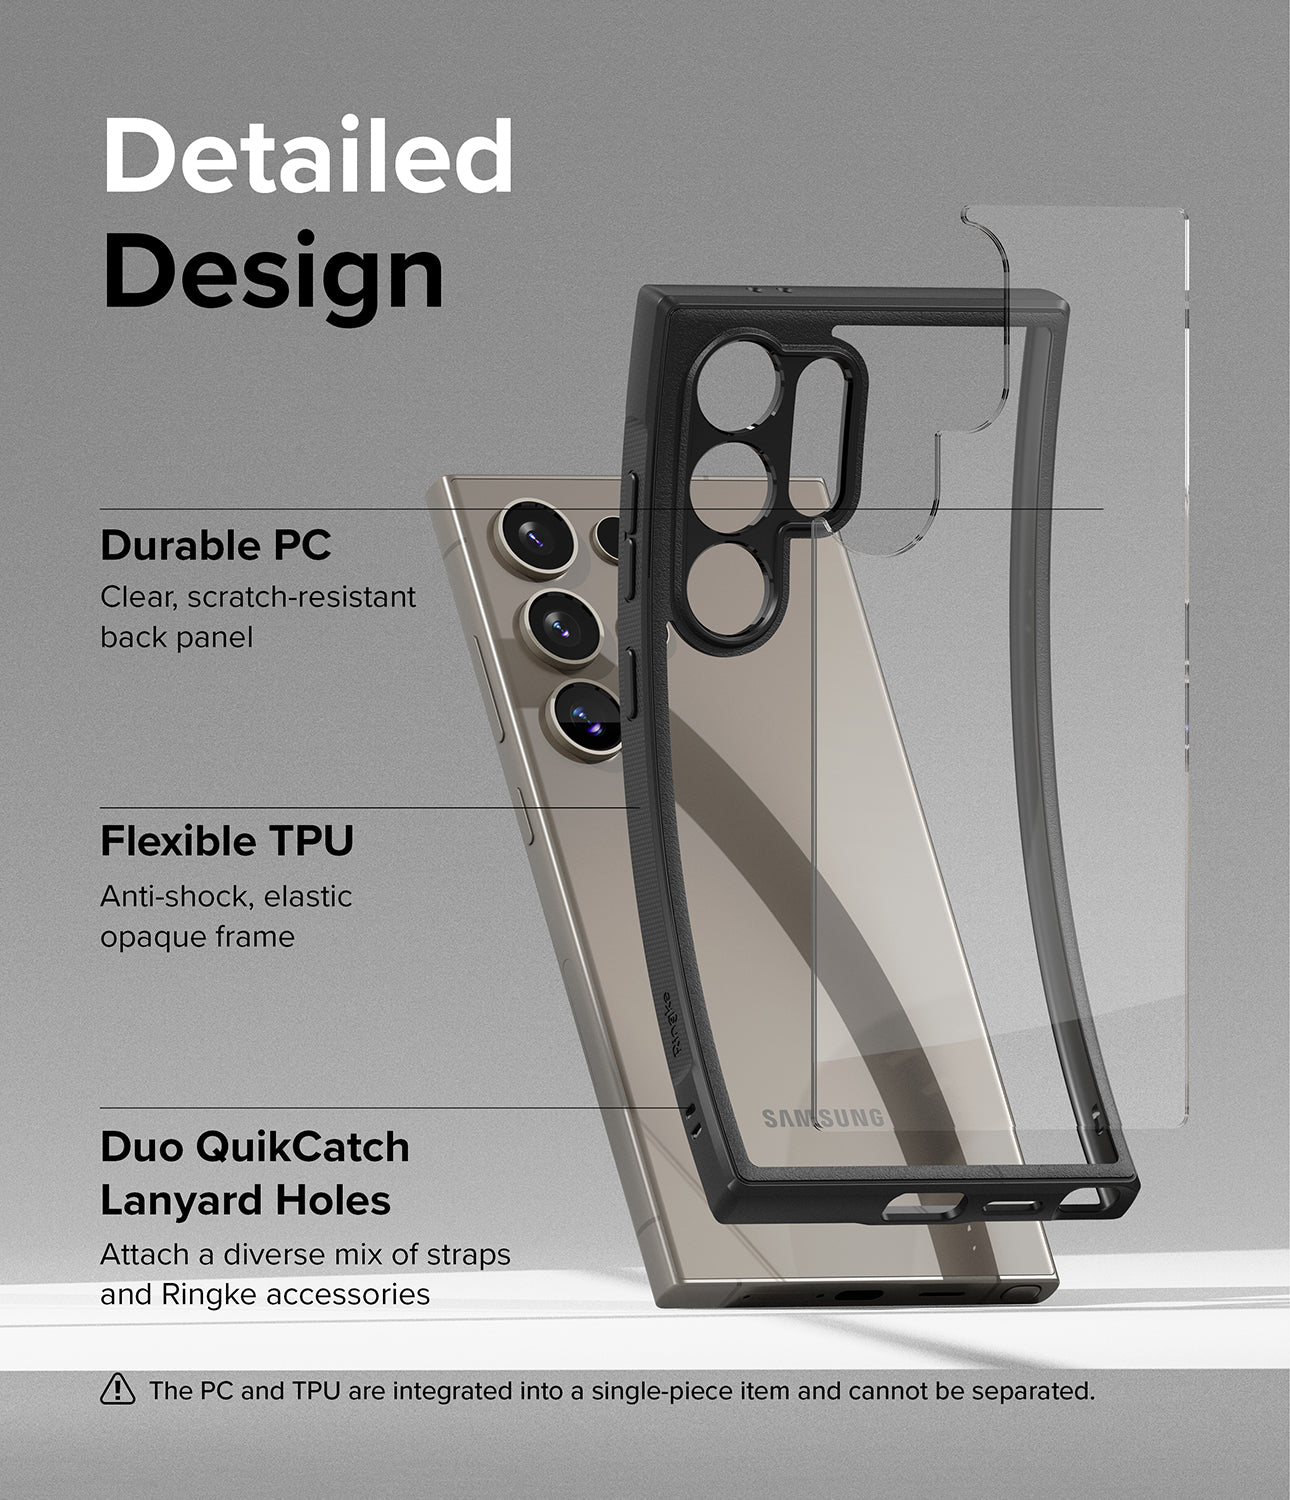 Galaxy S24 Ultra Case | Fusion Bold - Detailed Design. Clear, scratch-resistant back-panel with durable PC. Anti-shock, elastic opaque frame with flexible TPU. Duo QuikCatch Lanyard Holes to attach a diverse mix of straps and Ringke accessories.